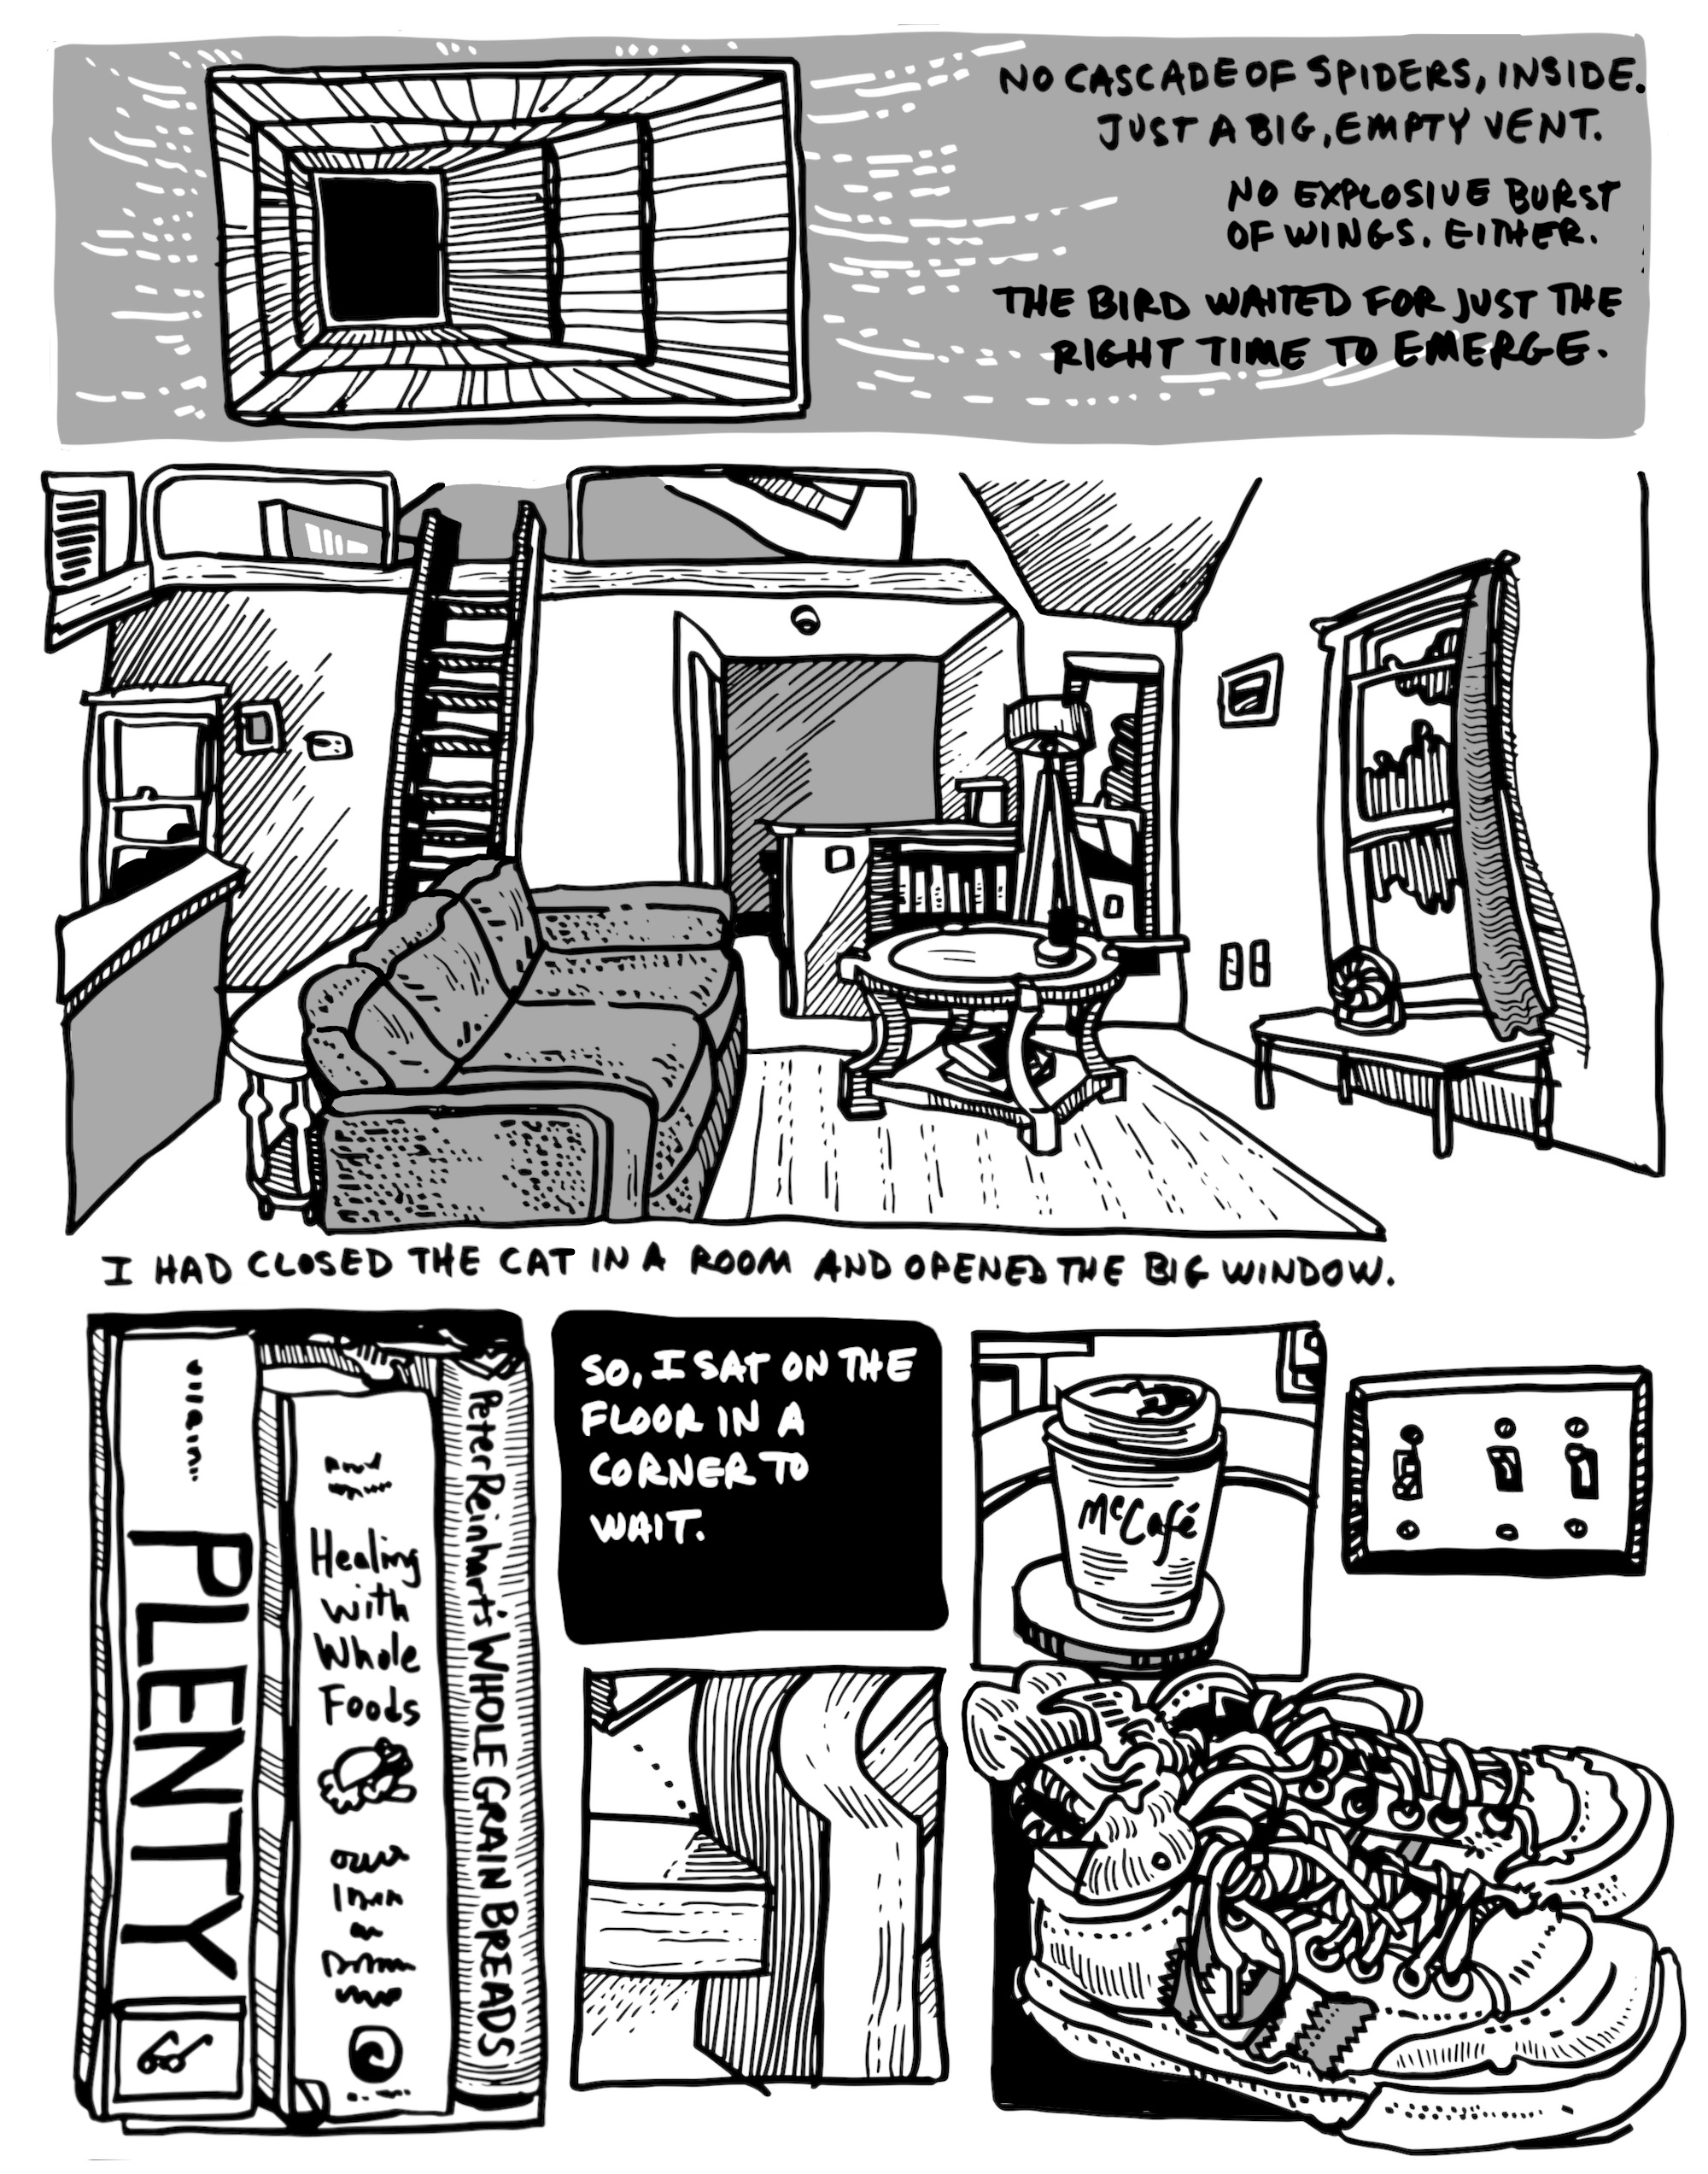 full comics page about a bird that gets in the house